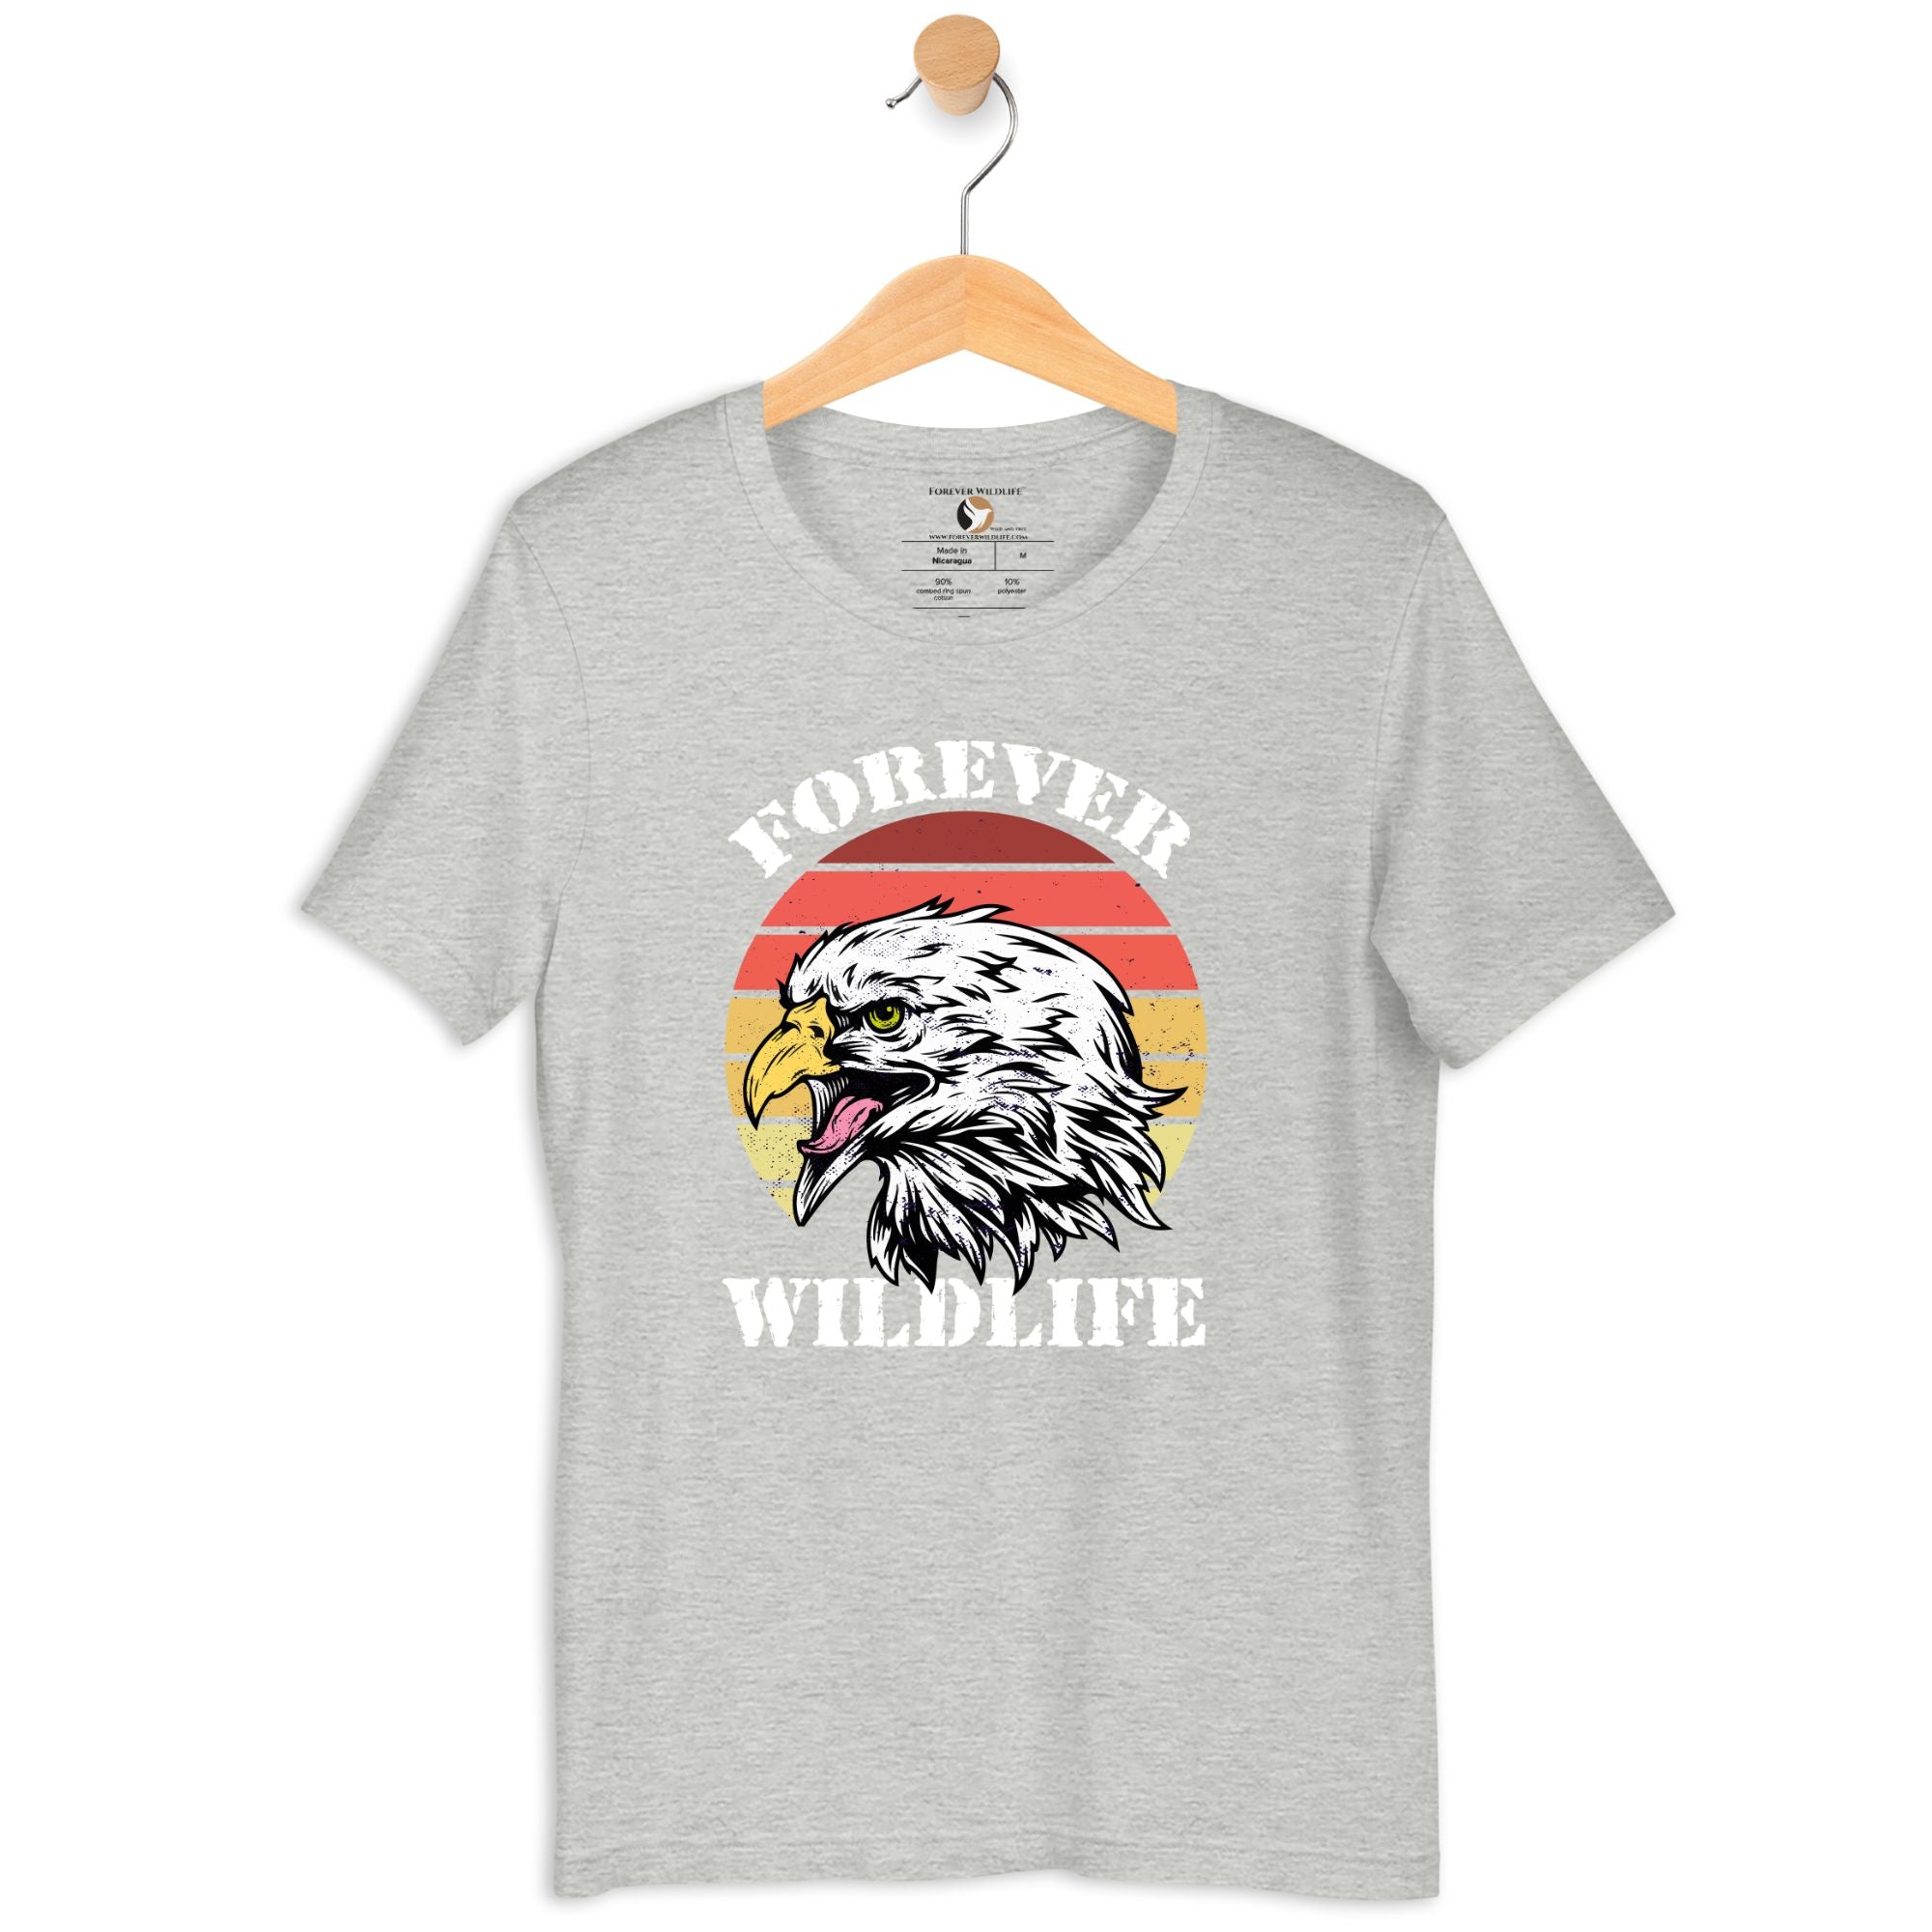 Eagle T-Shirt, Heather Tee in Athletic Grey – Premium Wildlife T-Shirt Design, Eagle Shirts and Wildlife Clothing from Forever Wildlife